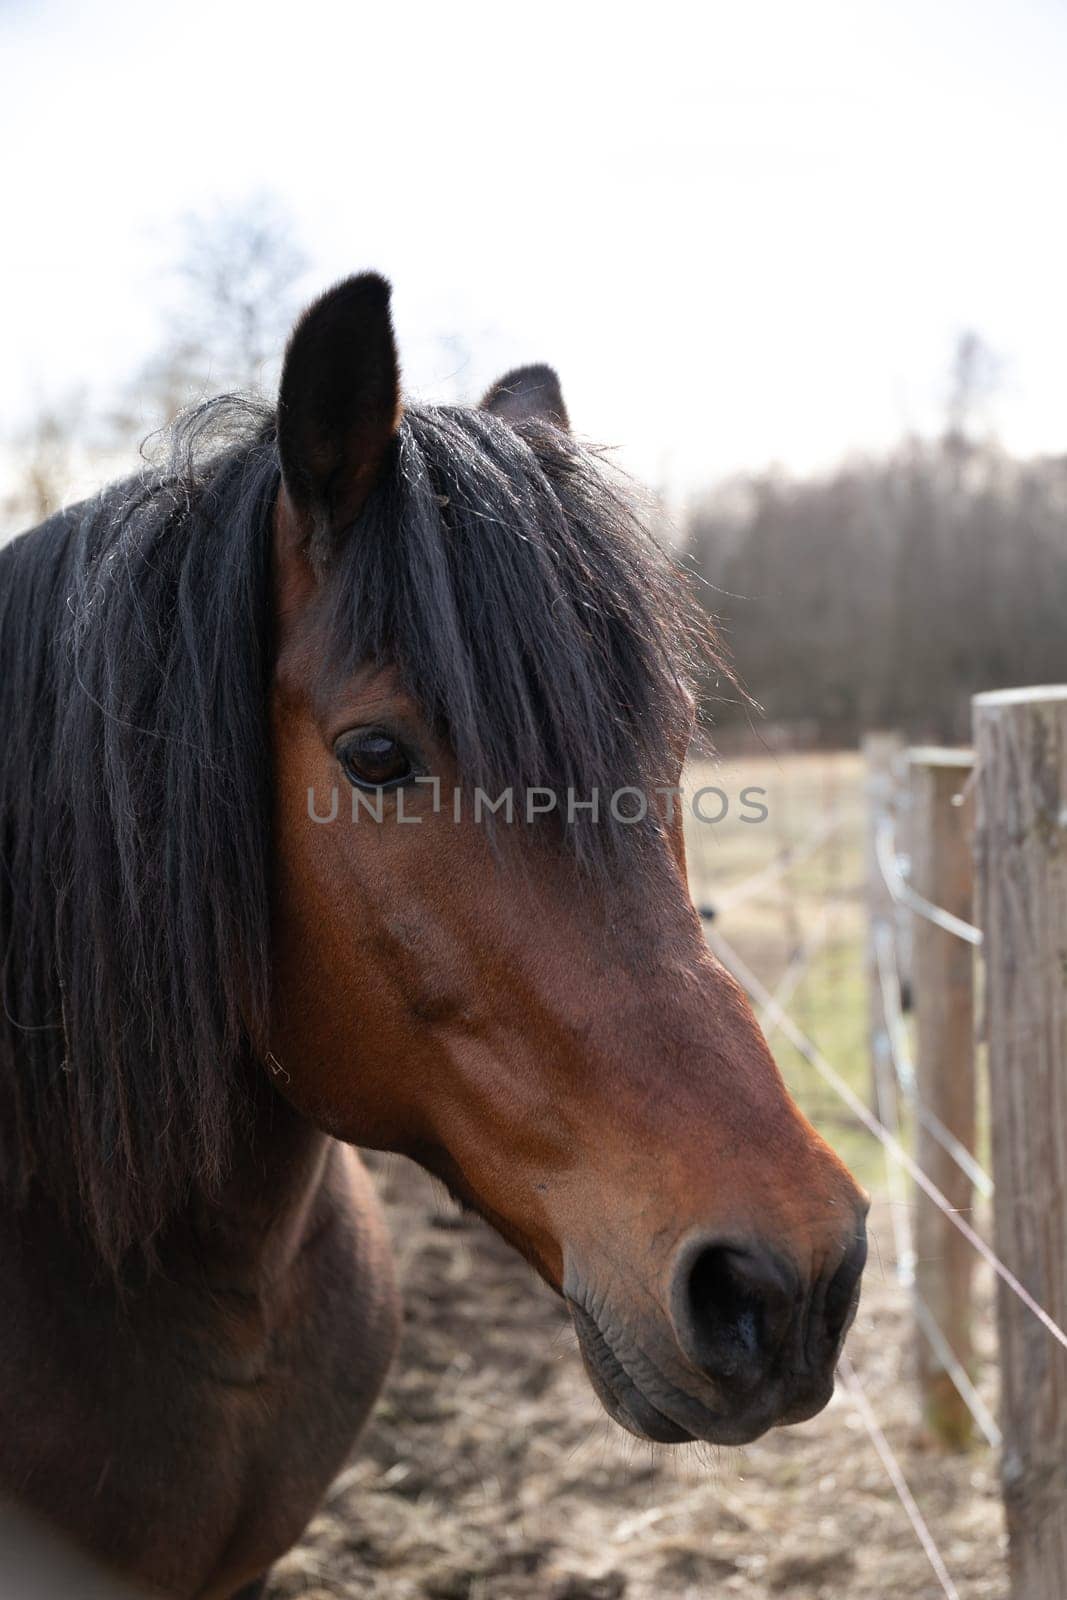 A brown horse is standing still next to a sturdy wooden fence in a grassy field on a sunny day. The horses mane is flowing in the gentle breeze as it gazes off into the distance.